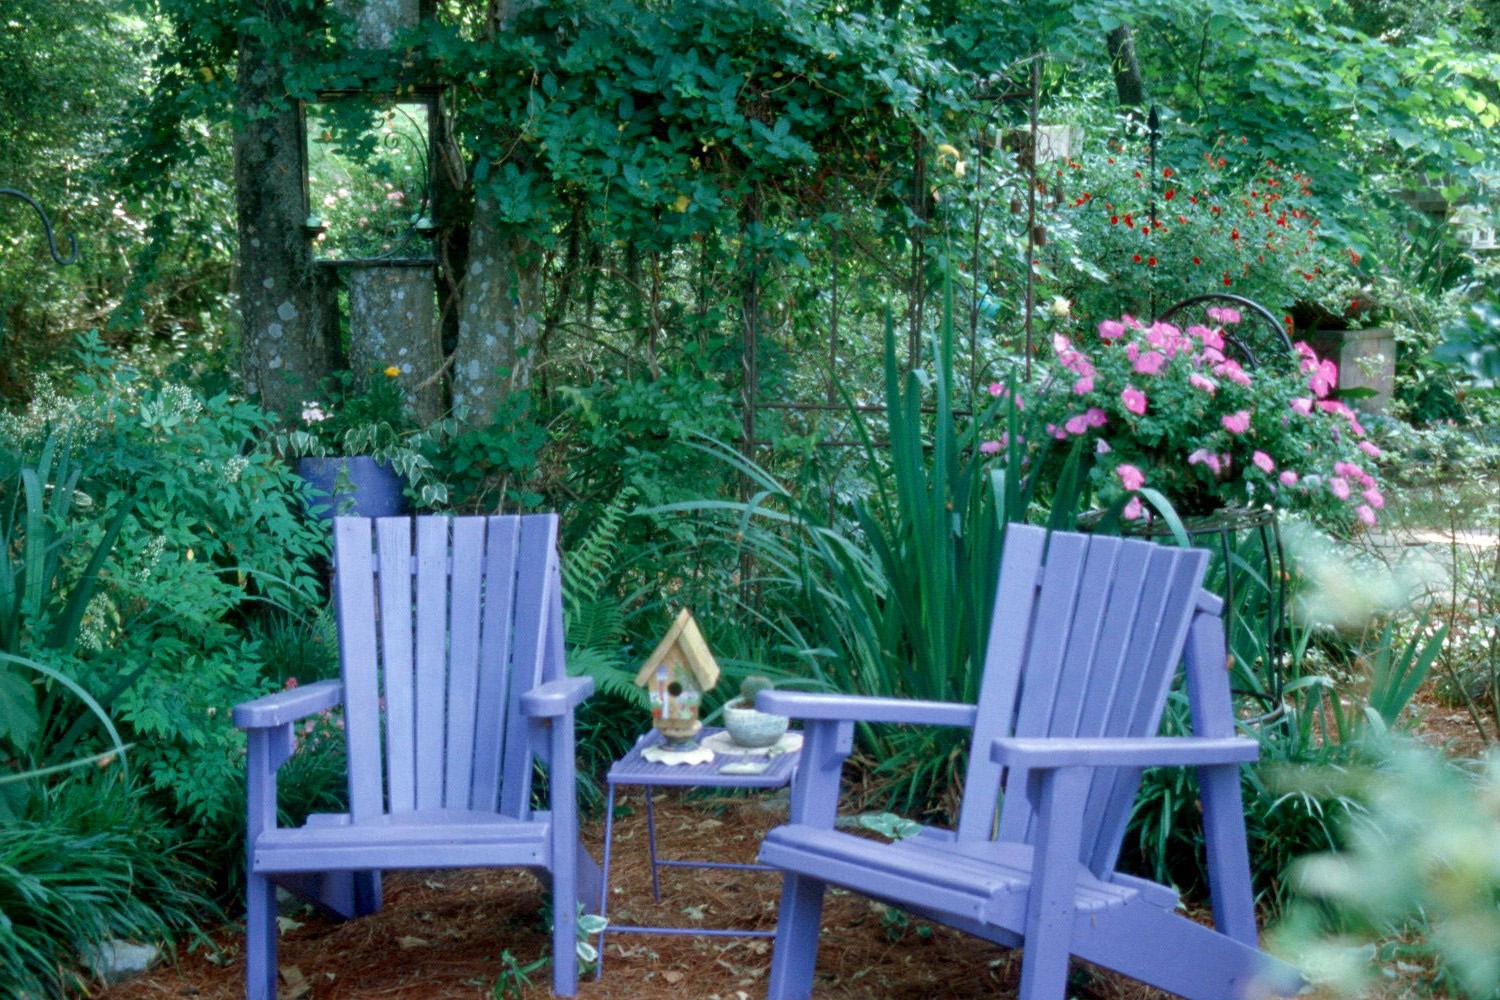 The mirror hanging on the tree over the left Adirondack chair blends comfortably into this lovely home-like setting.